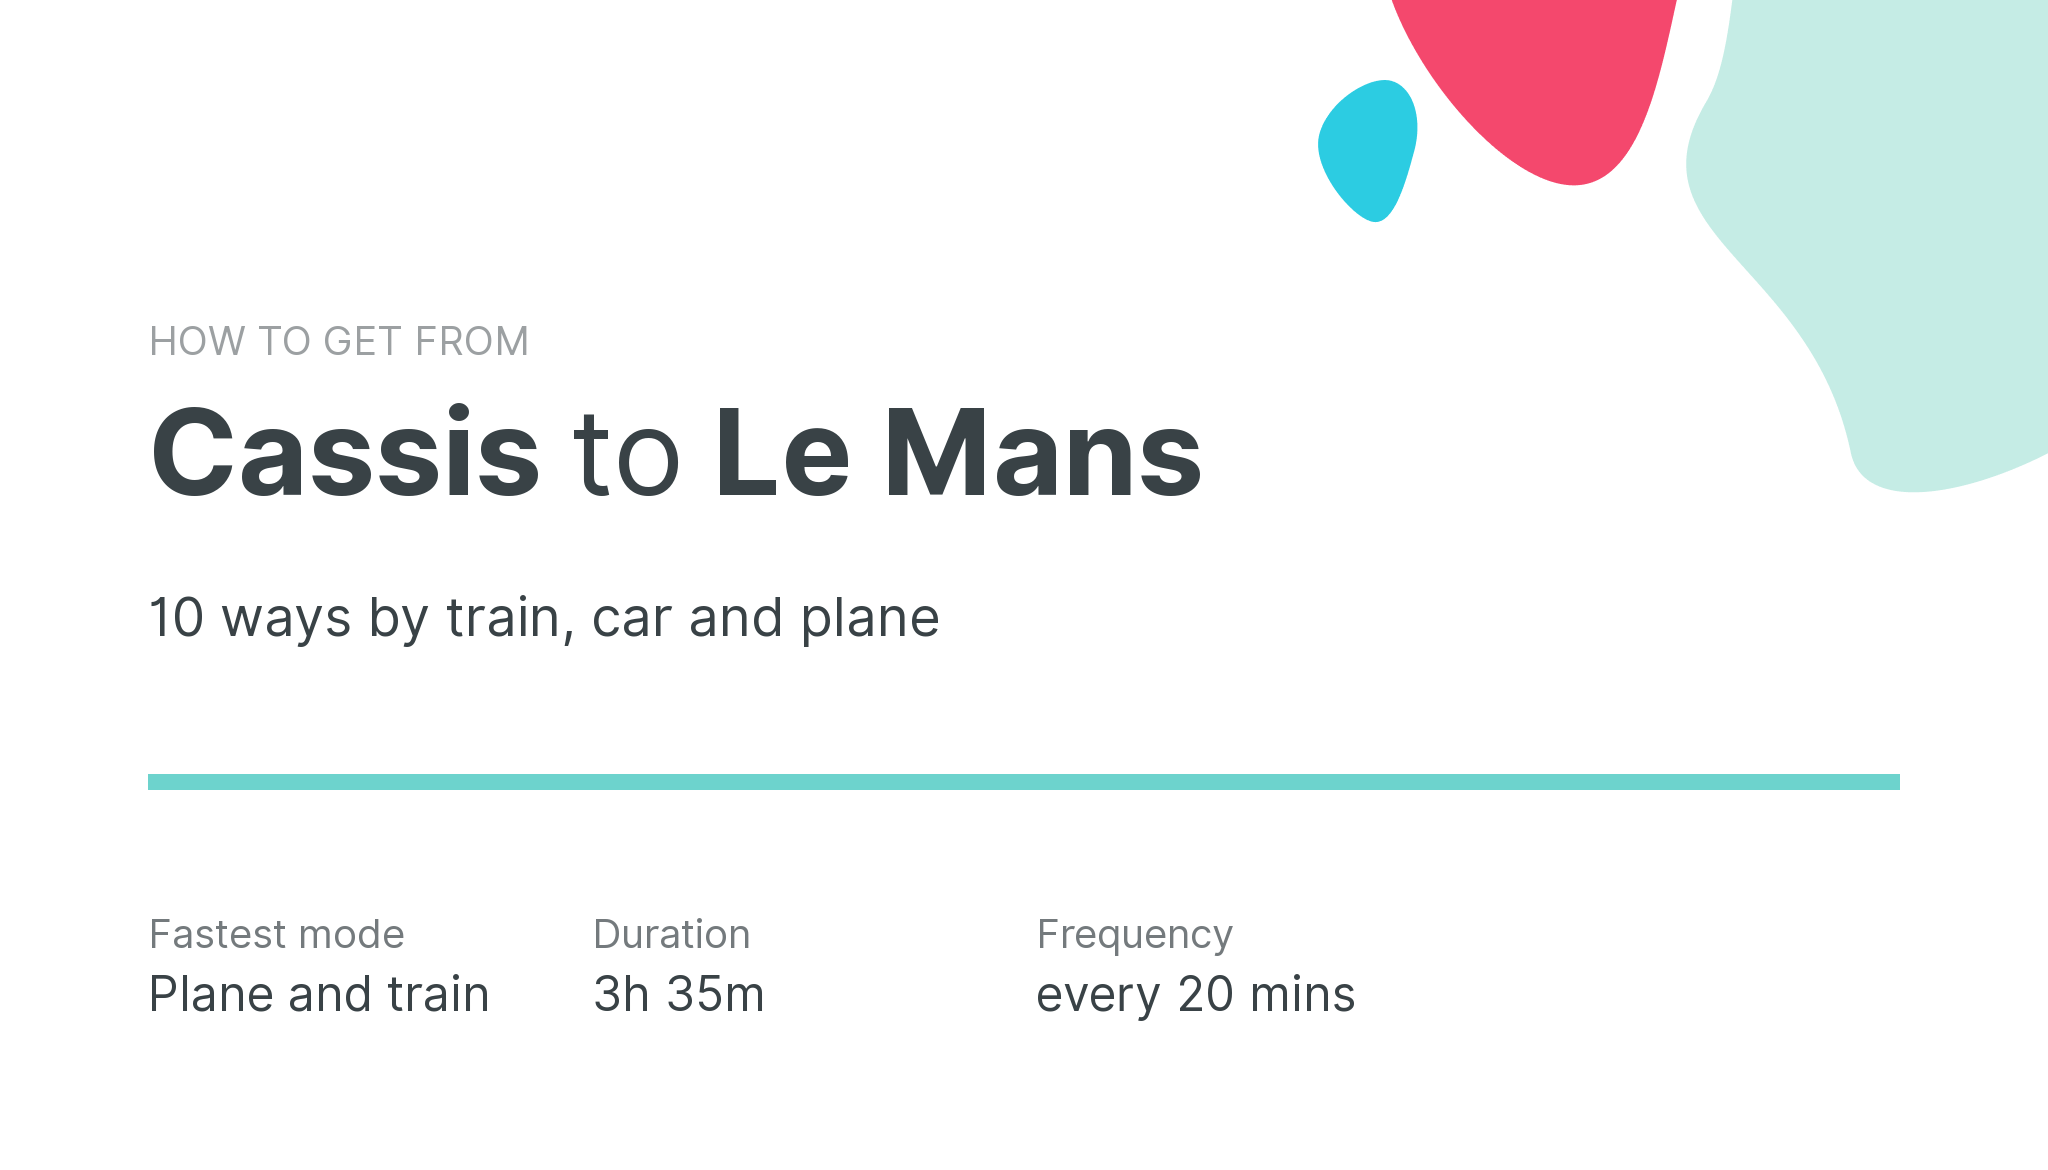 How do I get from Cassis to Le Mans